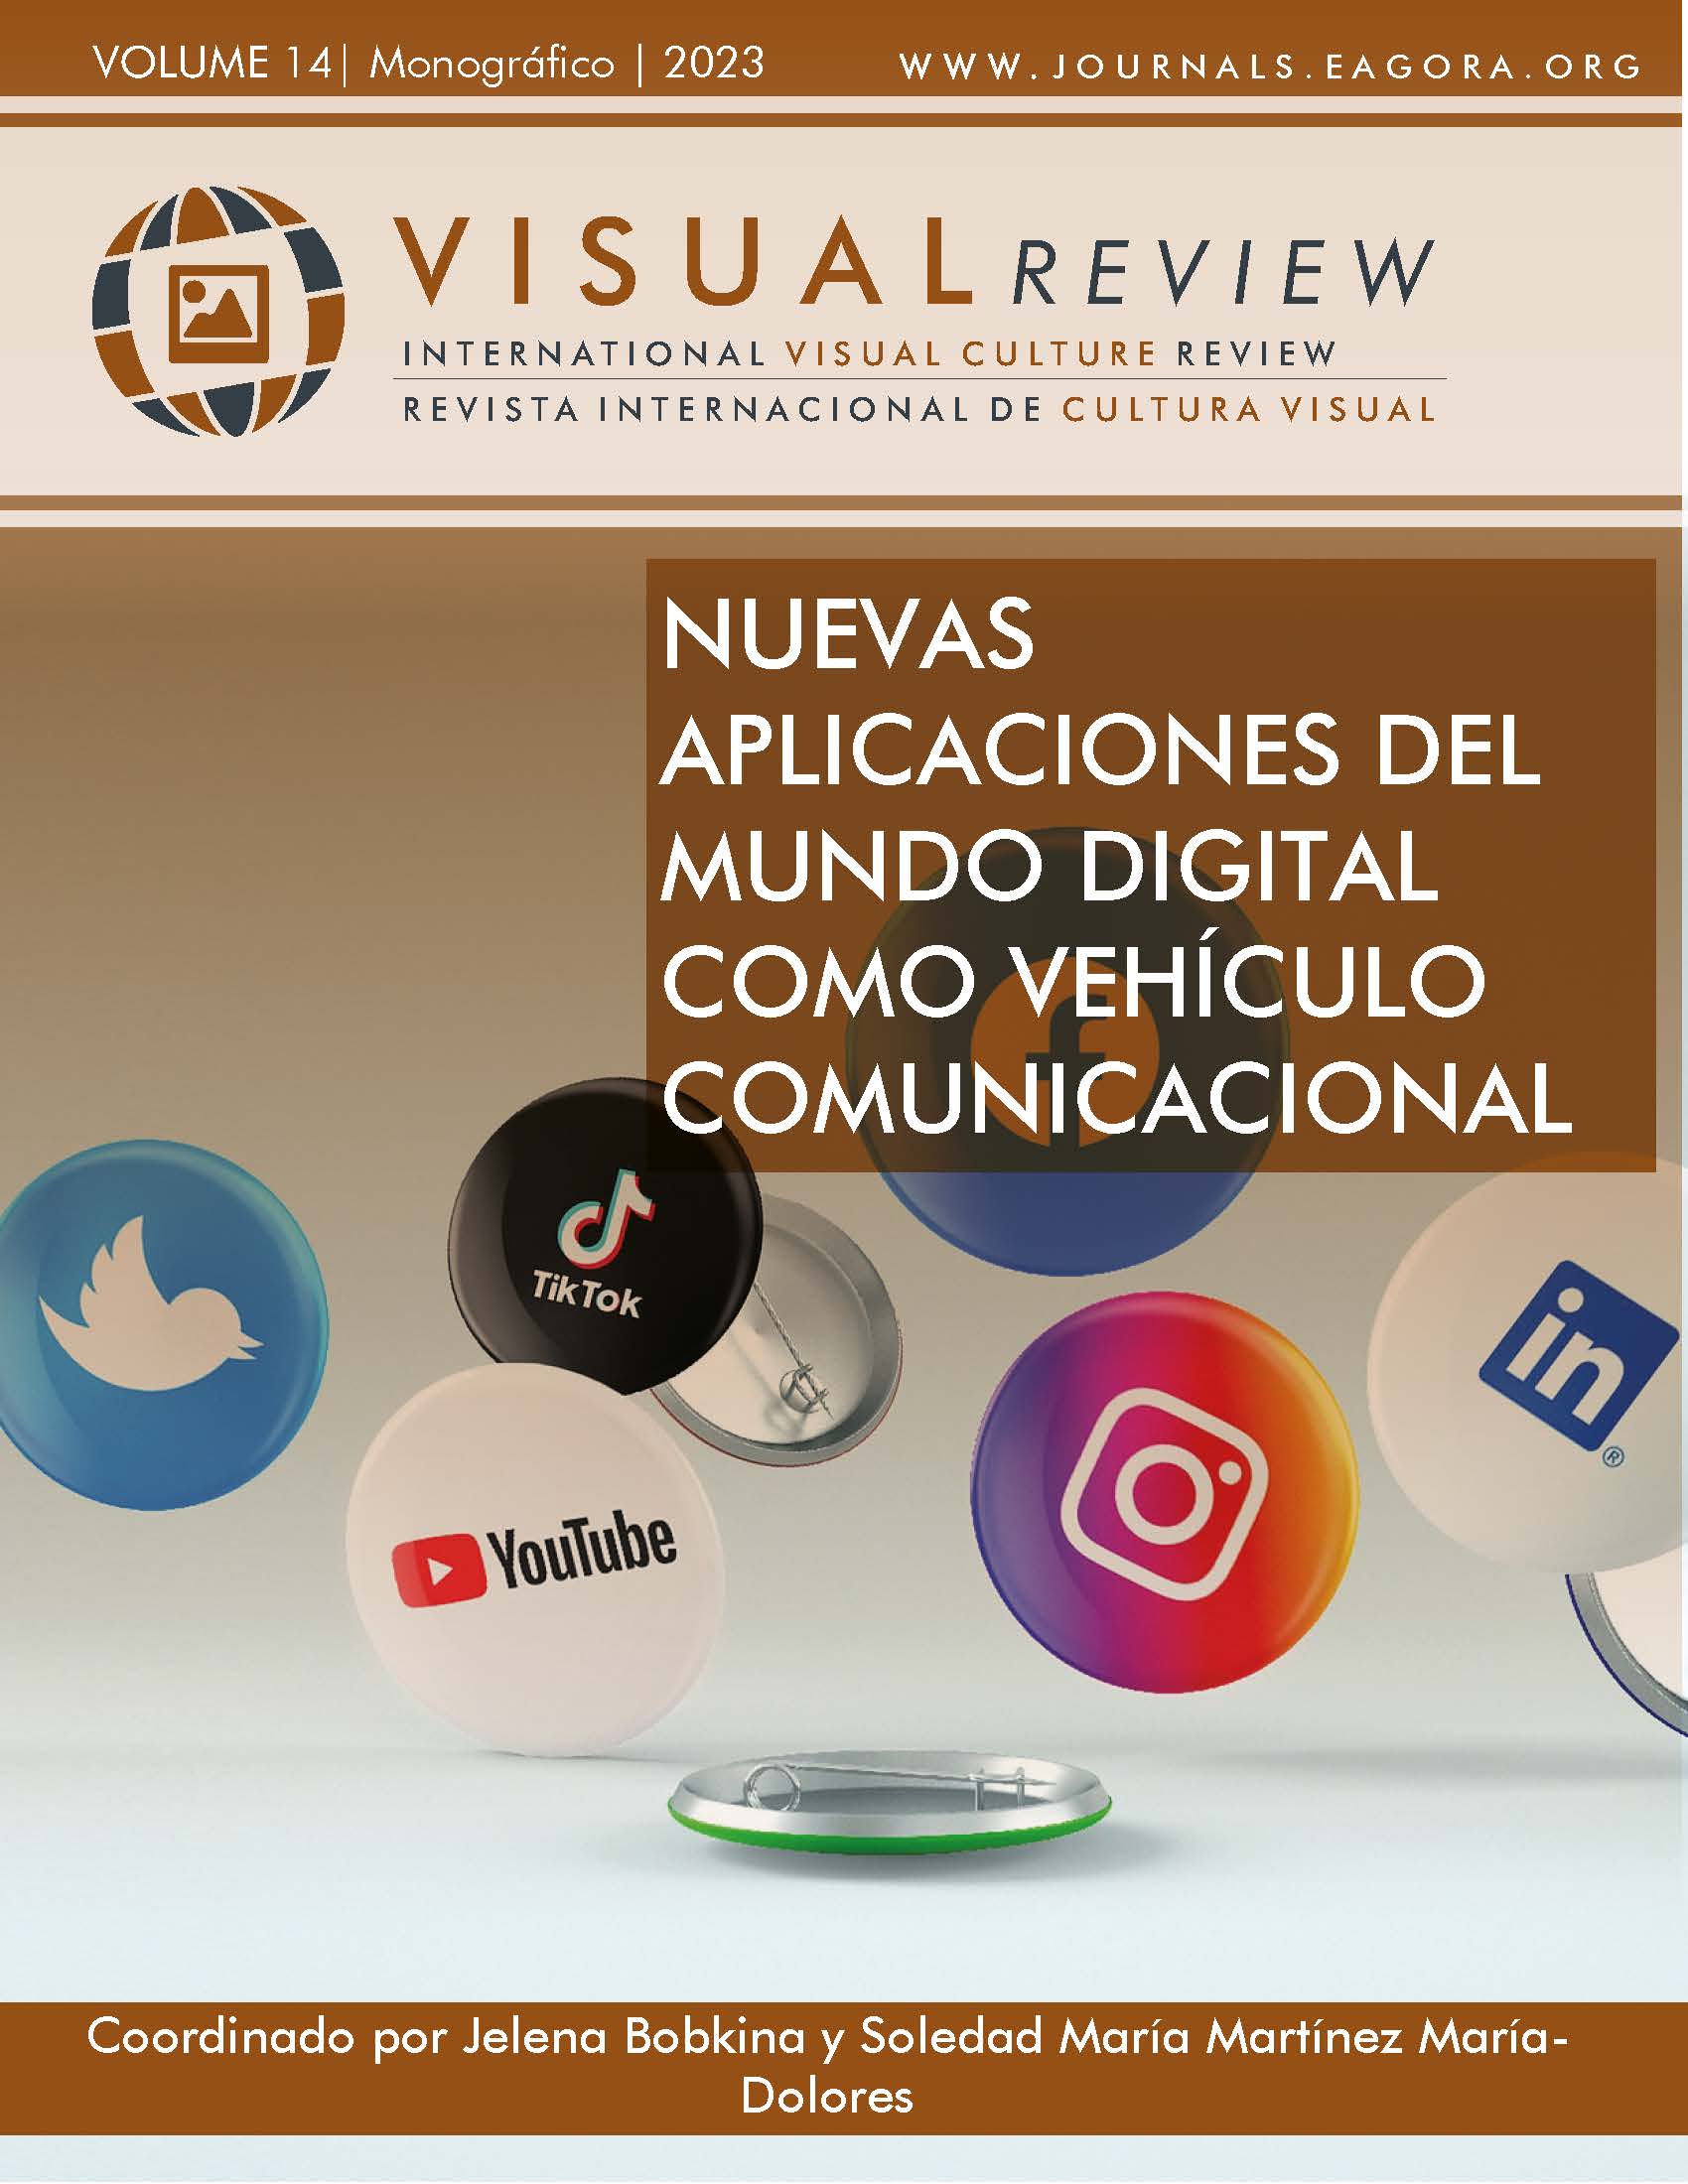 					View Vol. 14 No. 2 (2023): Monograph: "New applications of the digital world as communicational vehicle"
				